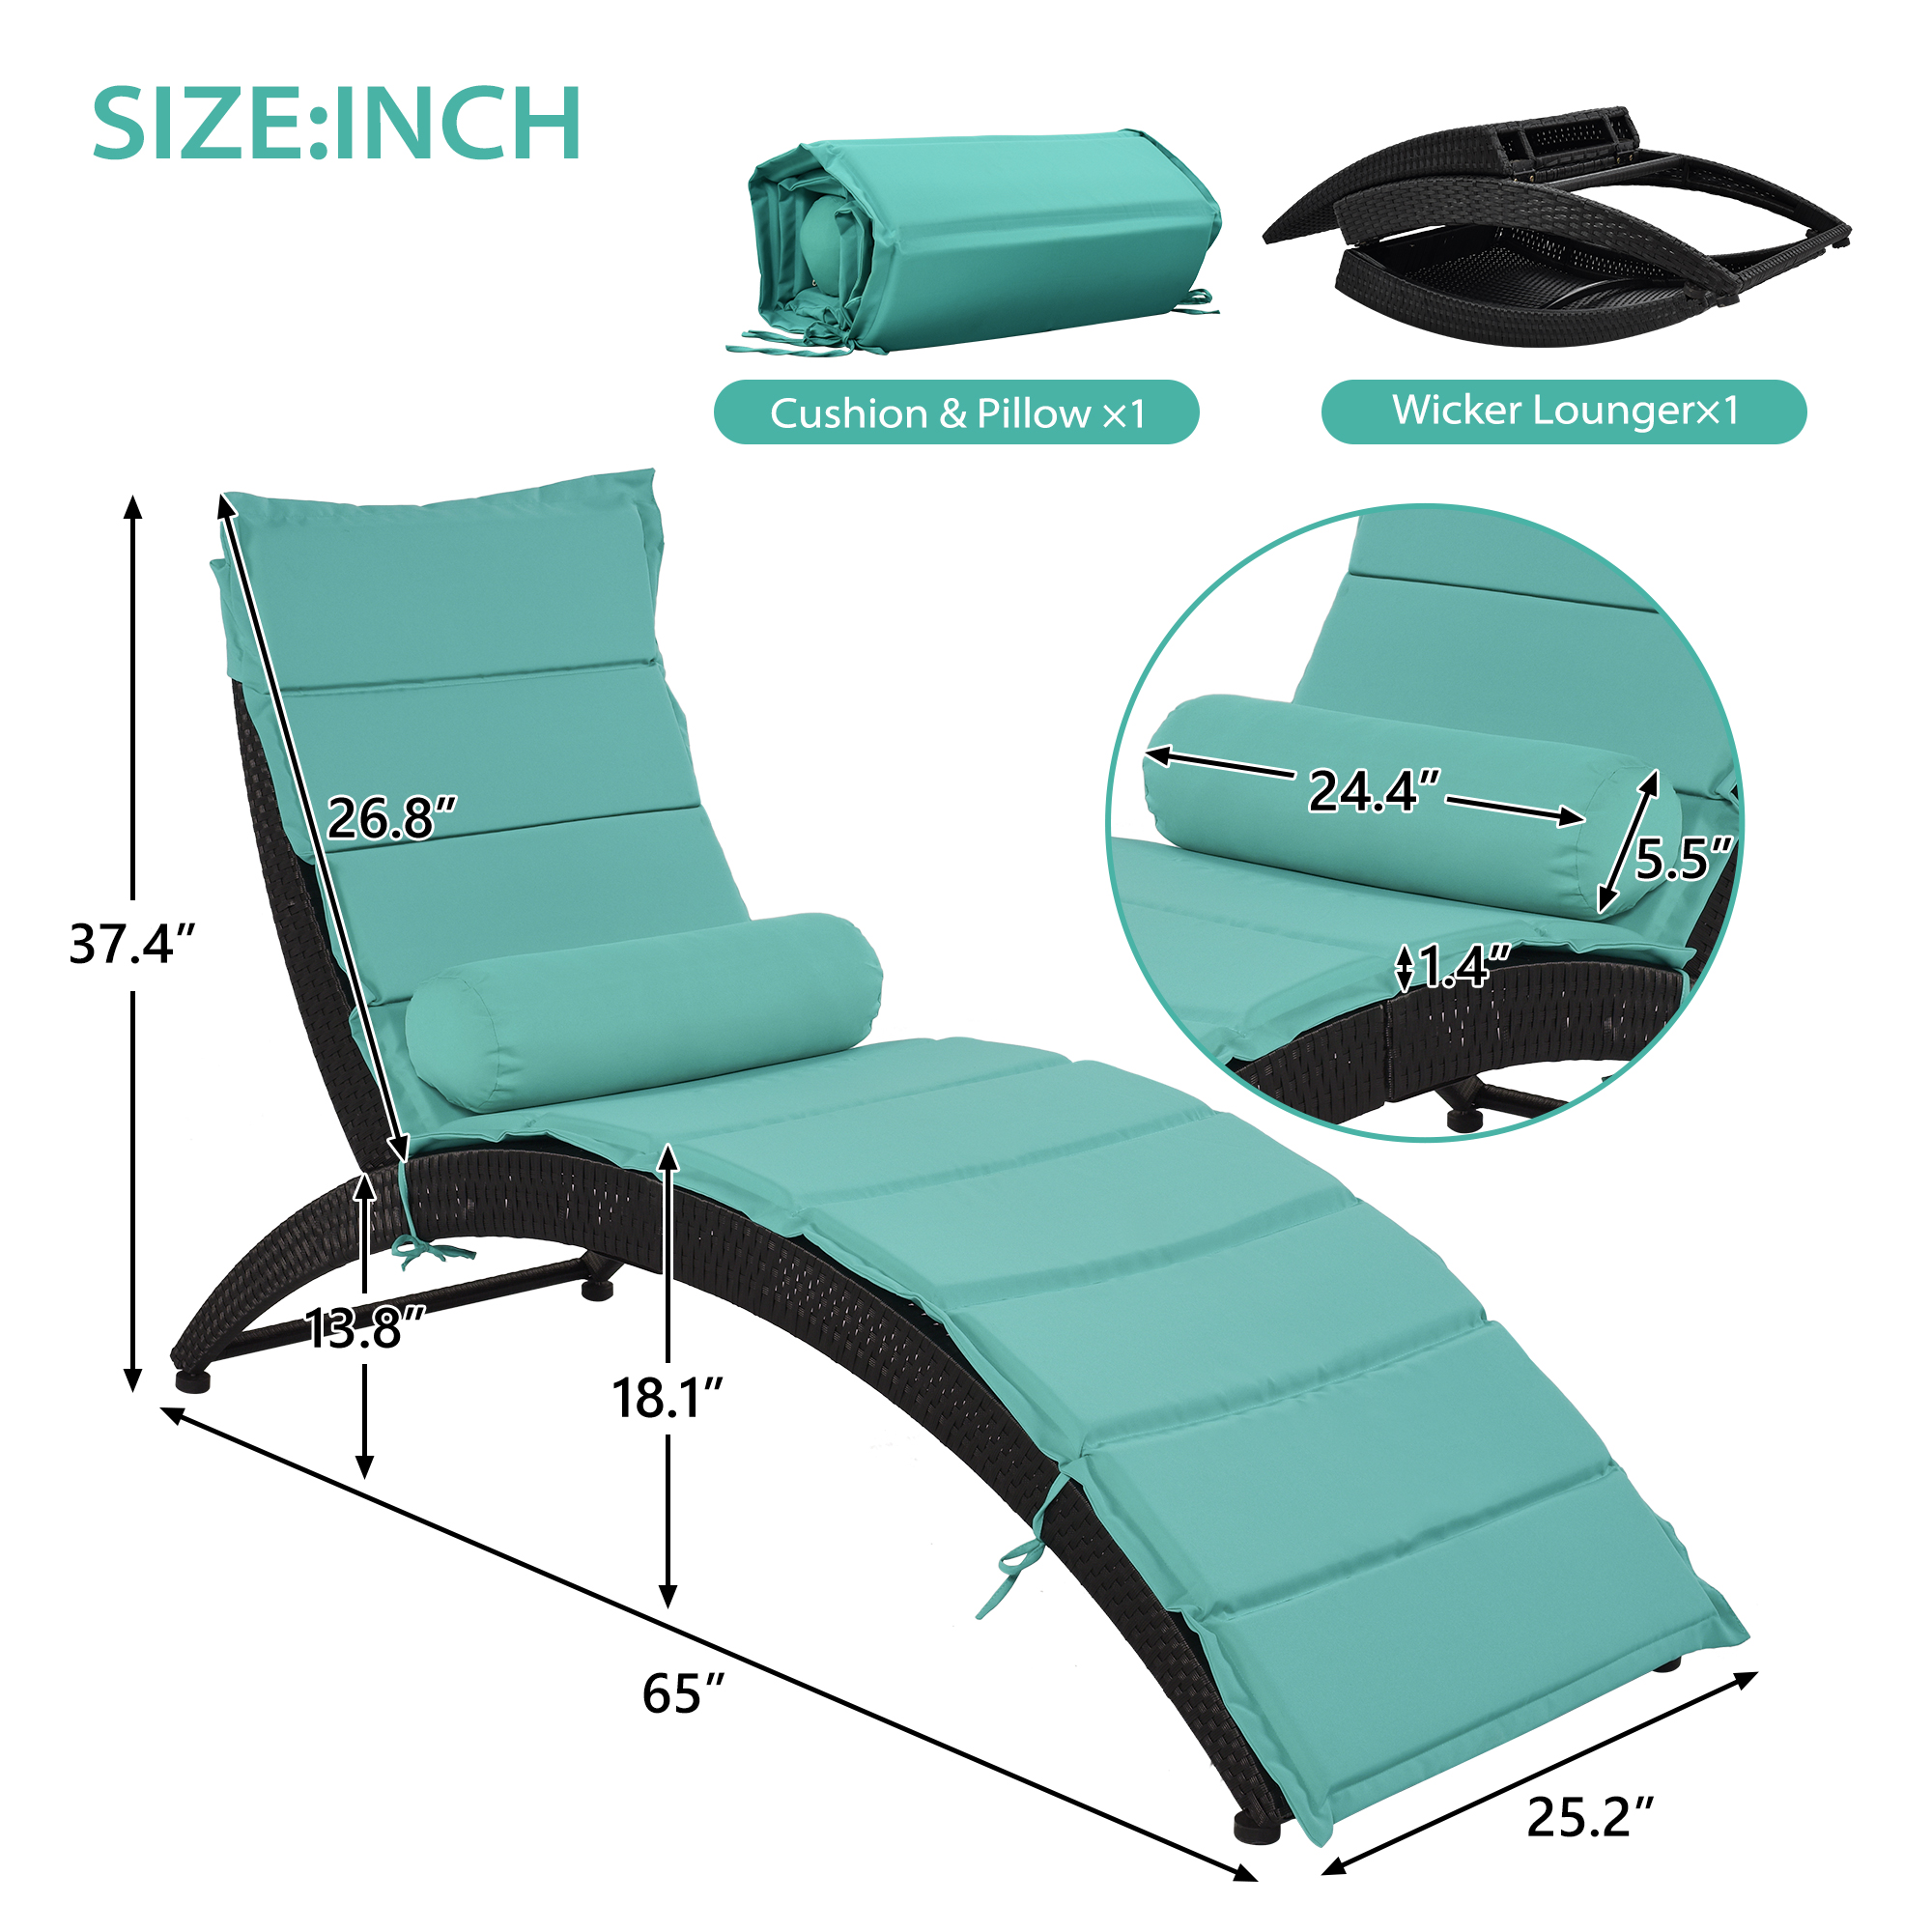 Outdoor Chaise Lounge Chair, Patio Reclining Sun Lounger, PE Wicker Rattan Foldable Lounge Chair with Steel Frame, Cushions, and Bolster Pillow, Reclining Chair for Poolside, Deck, Backyard, Blue - image 5 of 9